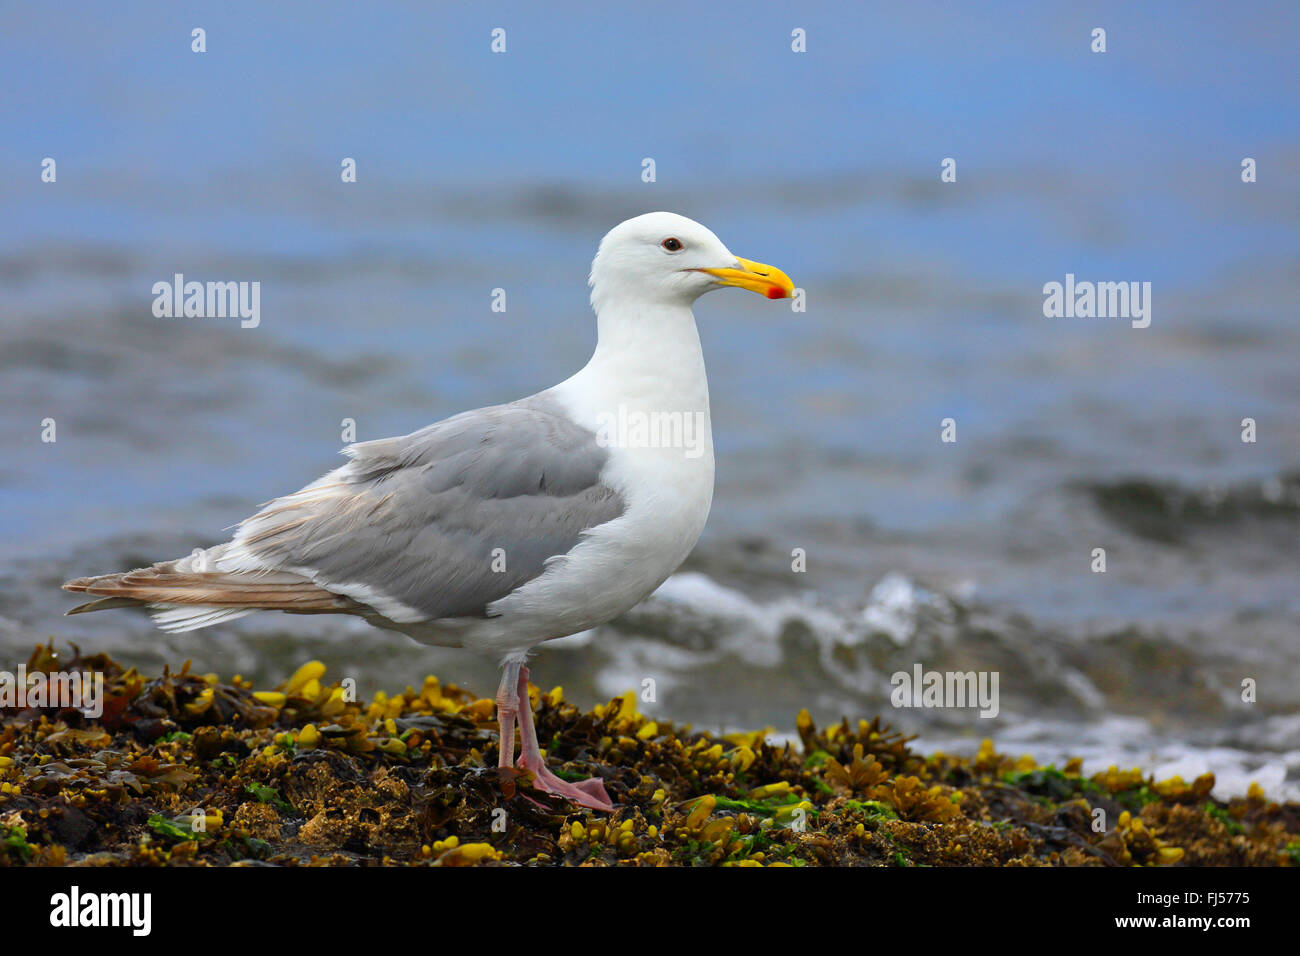 glaucous-winged gull (Larus glaucescens), standing on seaweeds at the seaside, Canada, British Columbia, Victoria Stock Photo